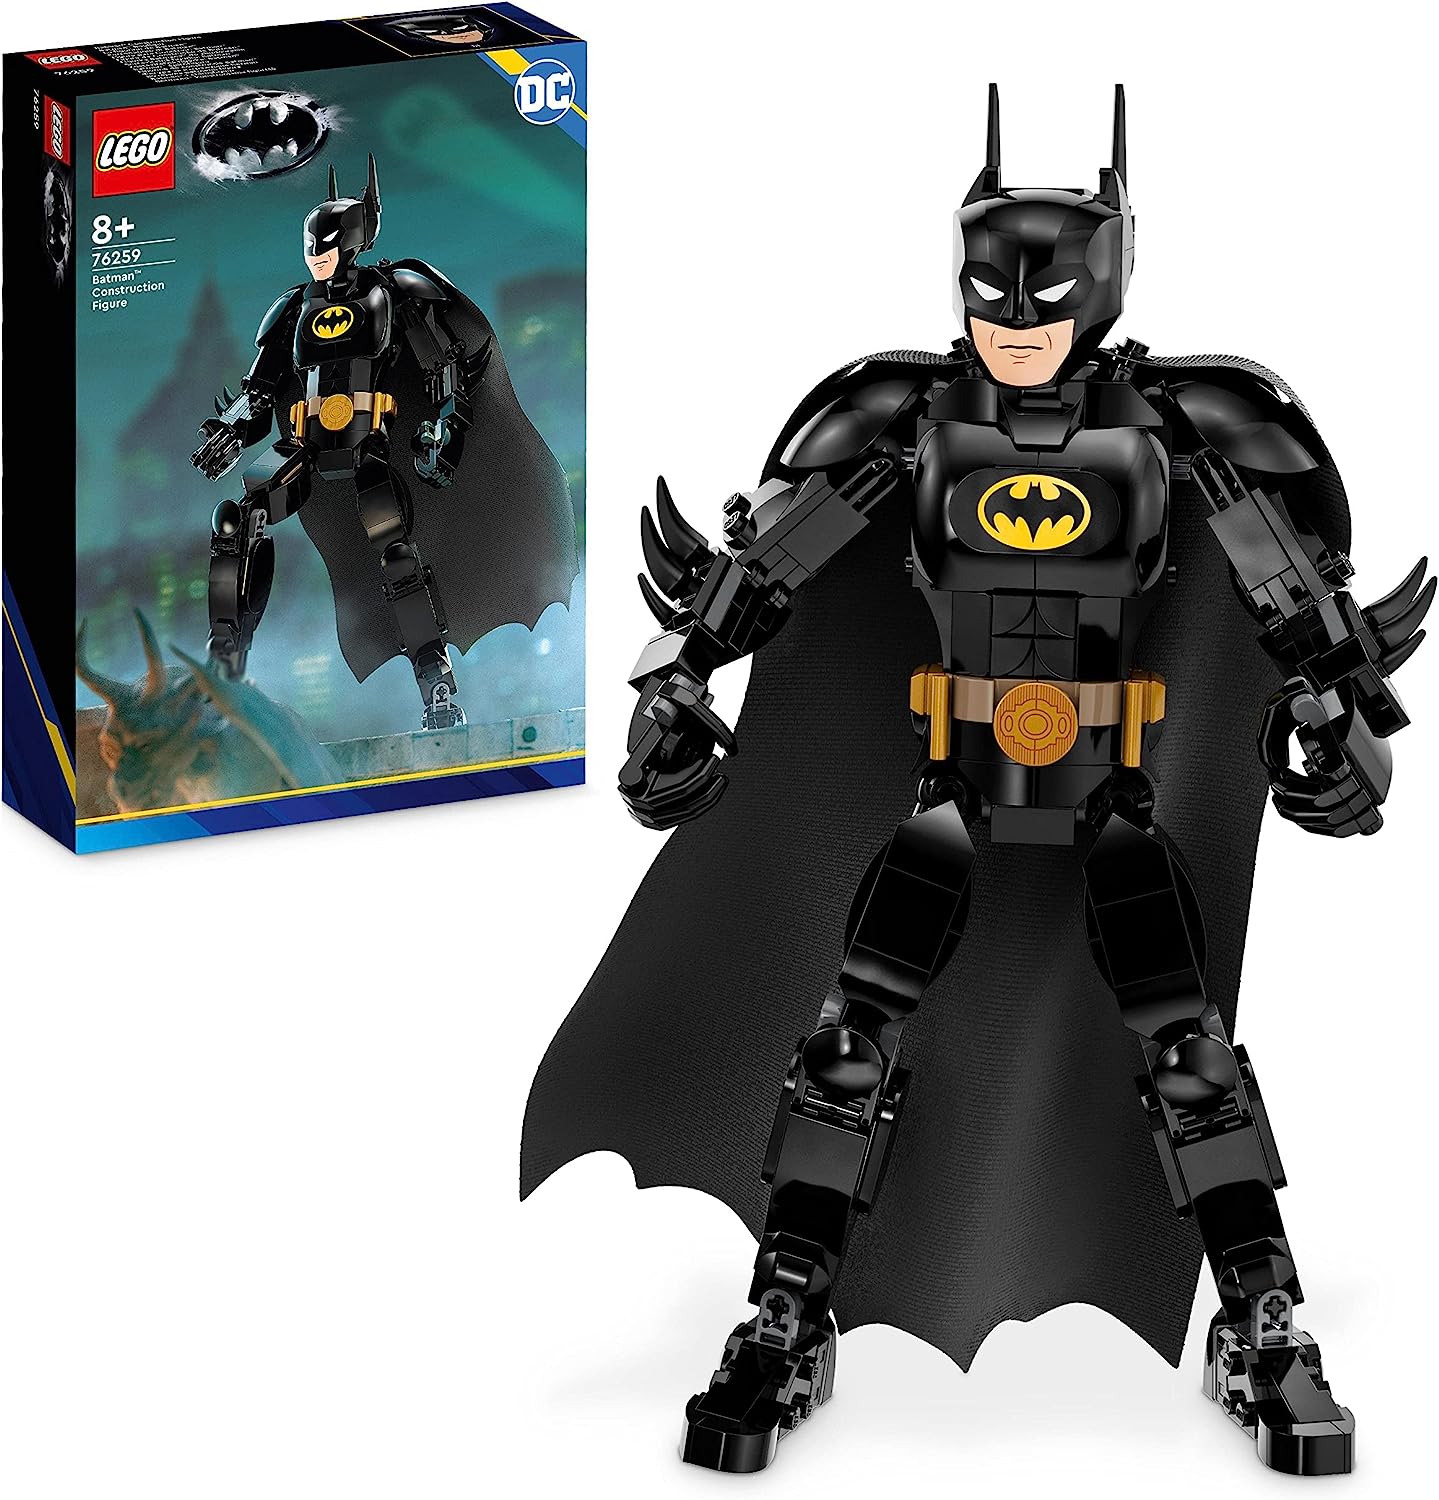 LEGO 76259 DC Batman Building Figure, Superhero Action Figure and Decoration Based on the Batman Movie of 1989, Figure With Cape, Toy and Collectable from Gotham City for Children from 8 years